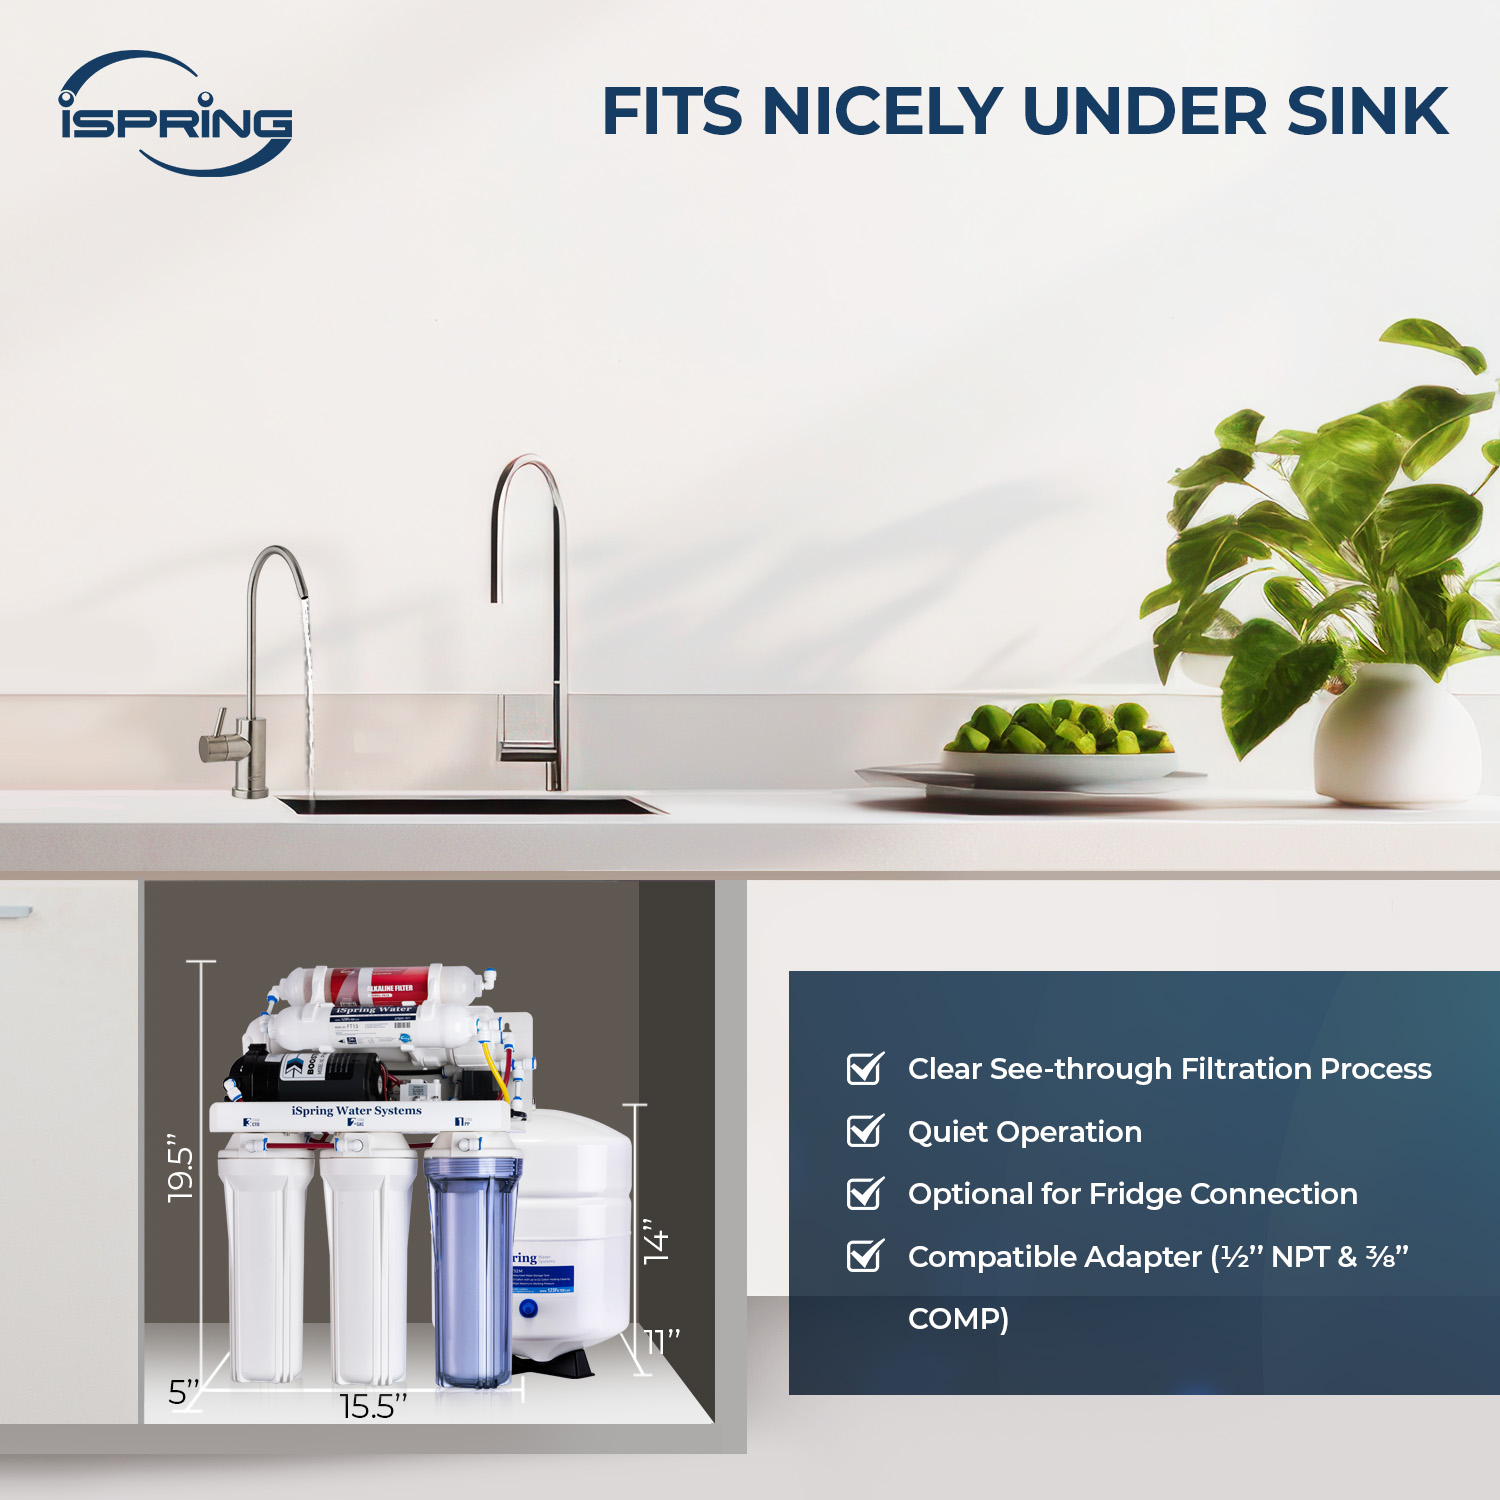 iSpring RCC7P-AK 6-Stage Reverse Osmosis System Under Sink with Alkaline Water Filter and Pump, pH+, 75 GPD, TDS Reduction, RO Drinking Water Filtration System - image 5 of 8